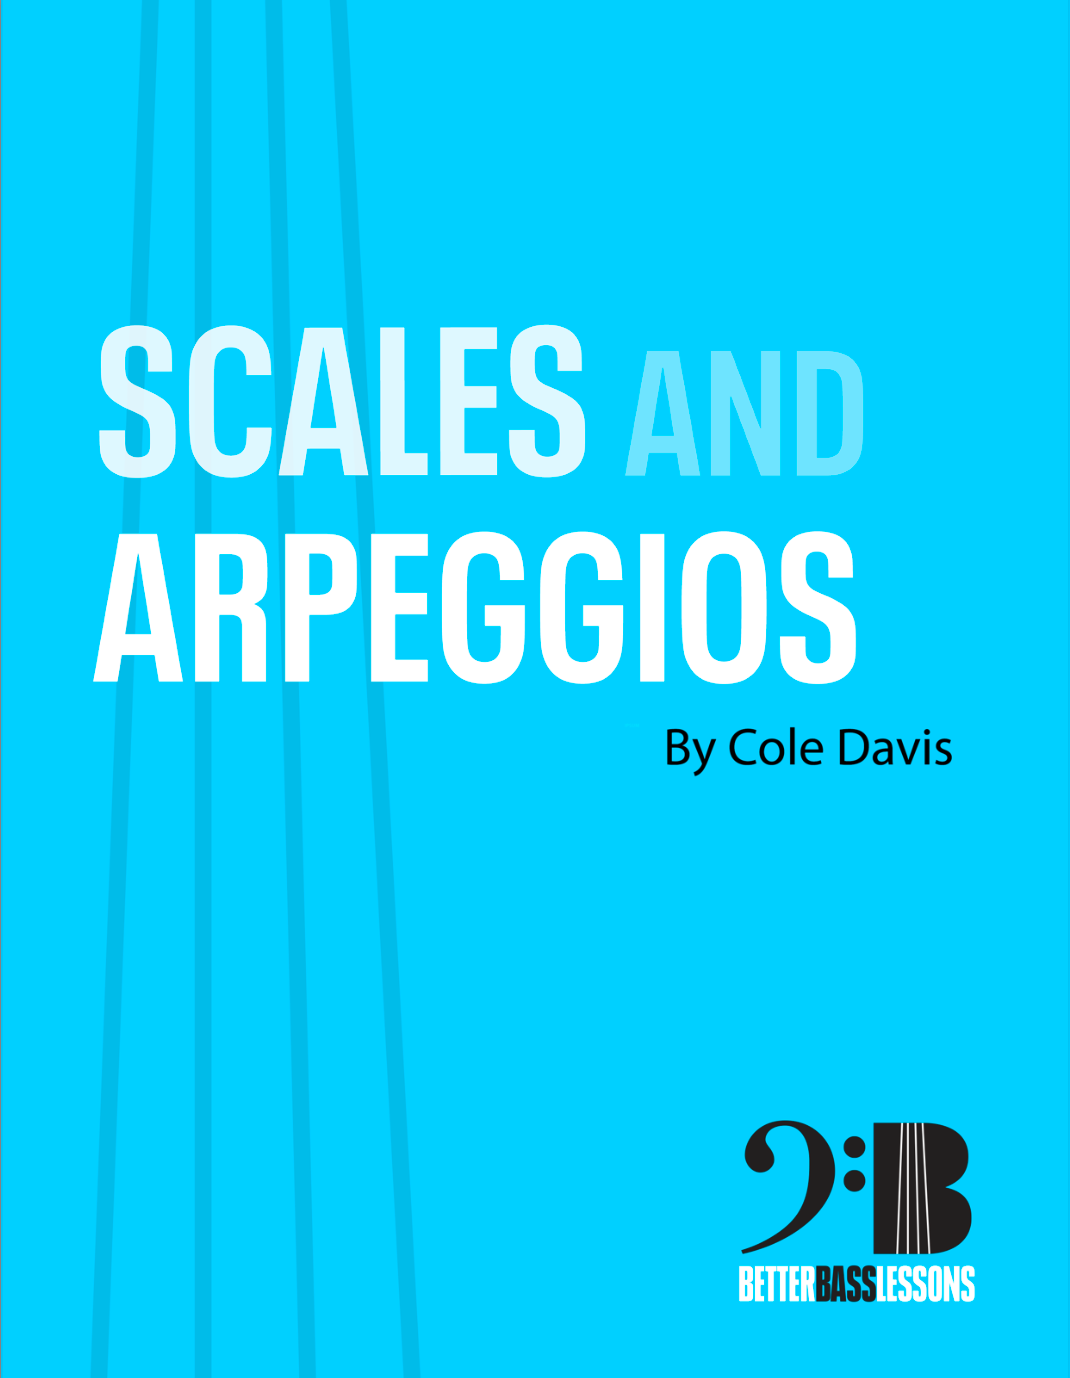 SCALES AND ARPEGGIOS